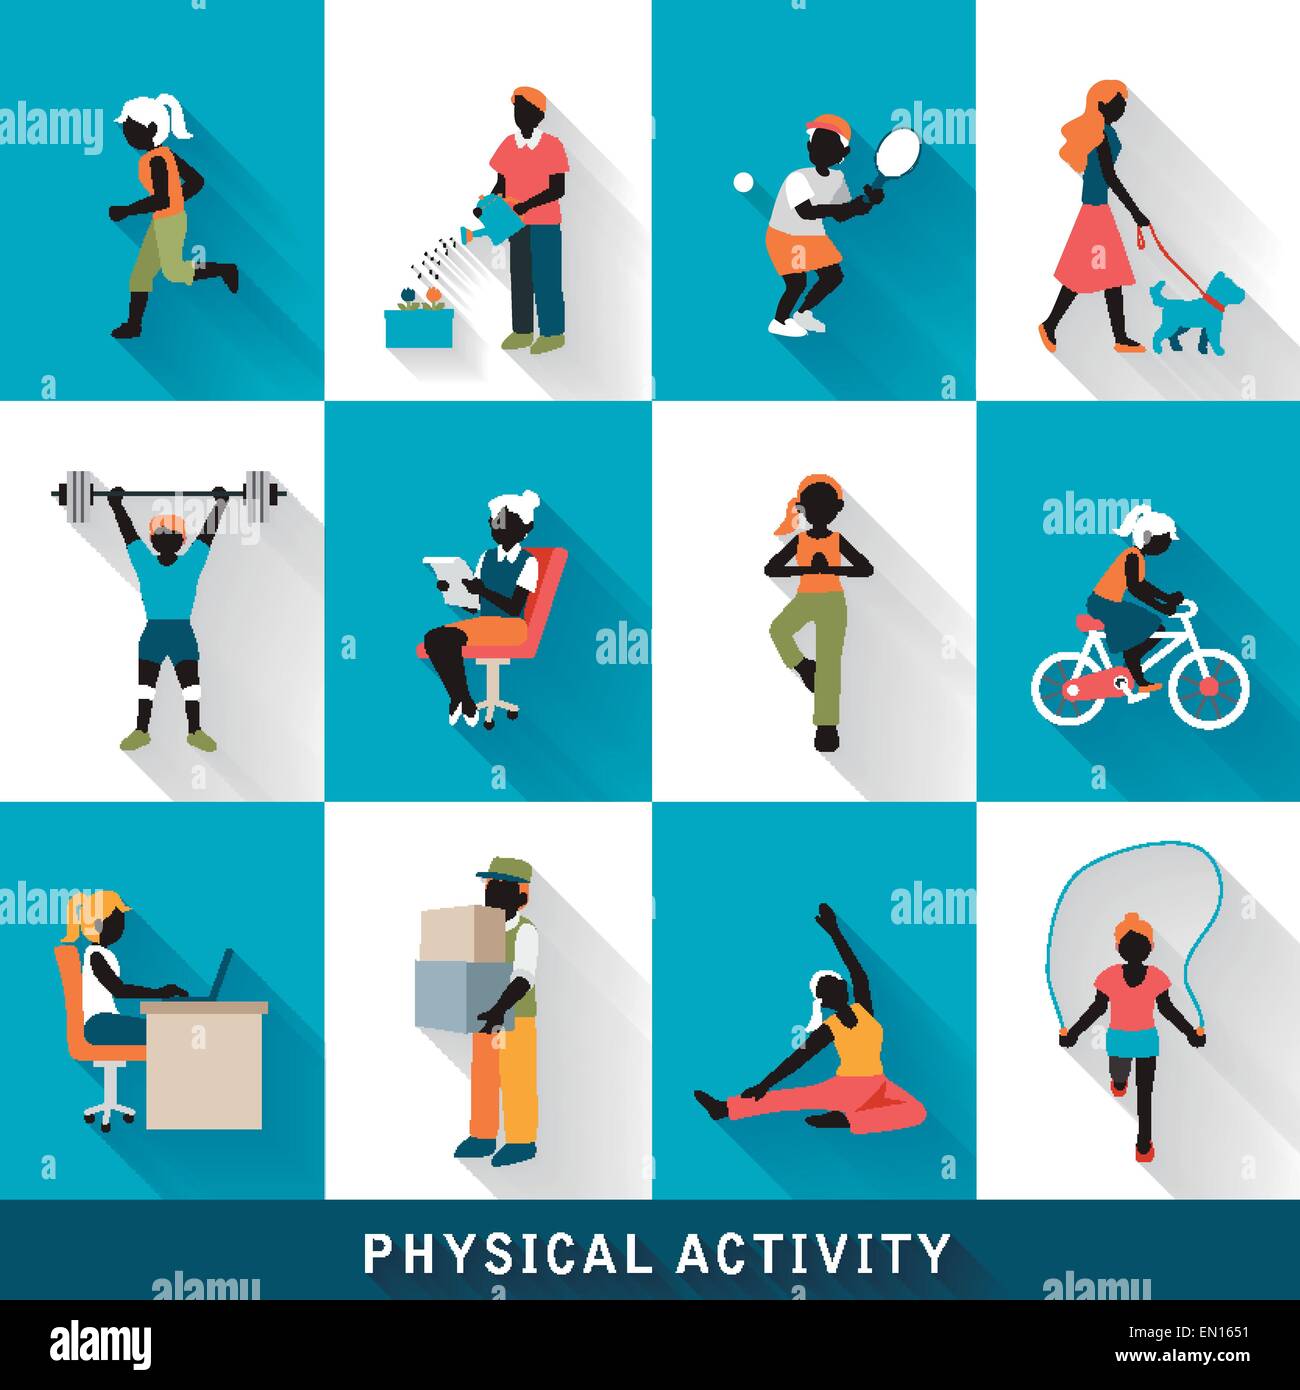 modern physical activity icons set isolated over blue and white background Stock Vector